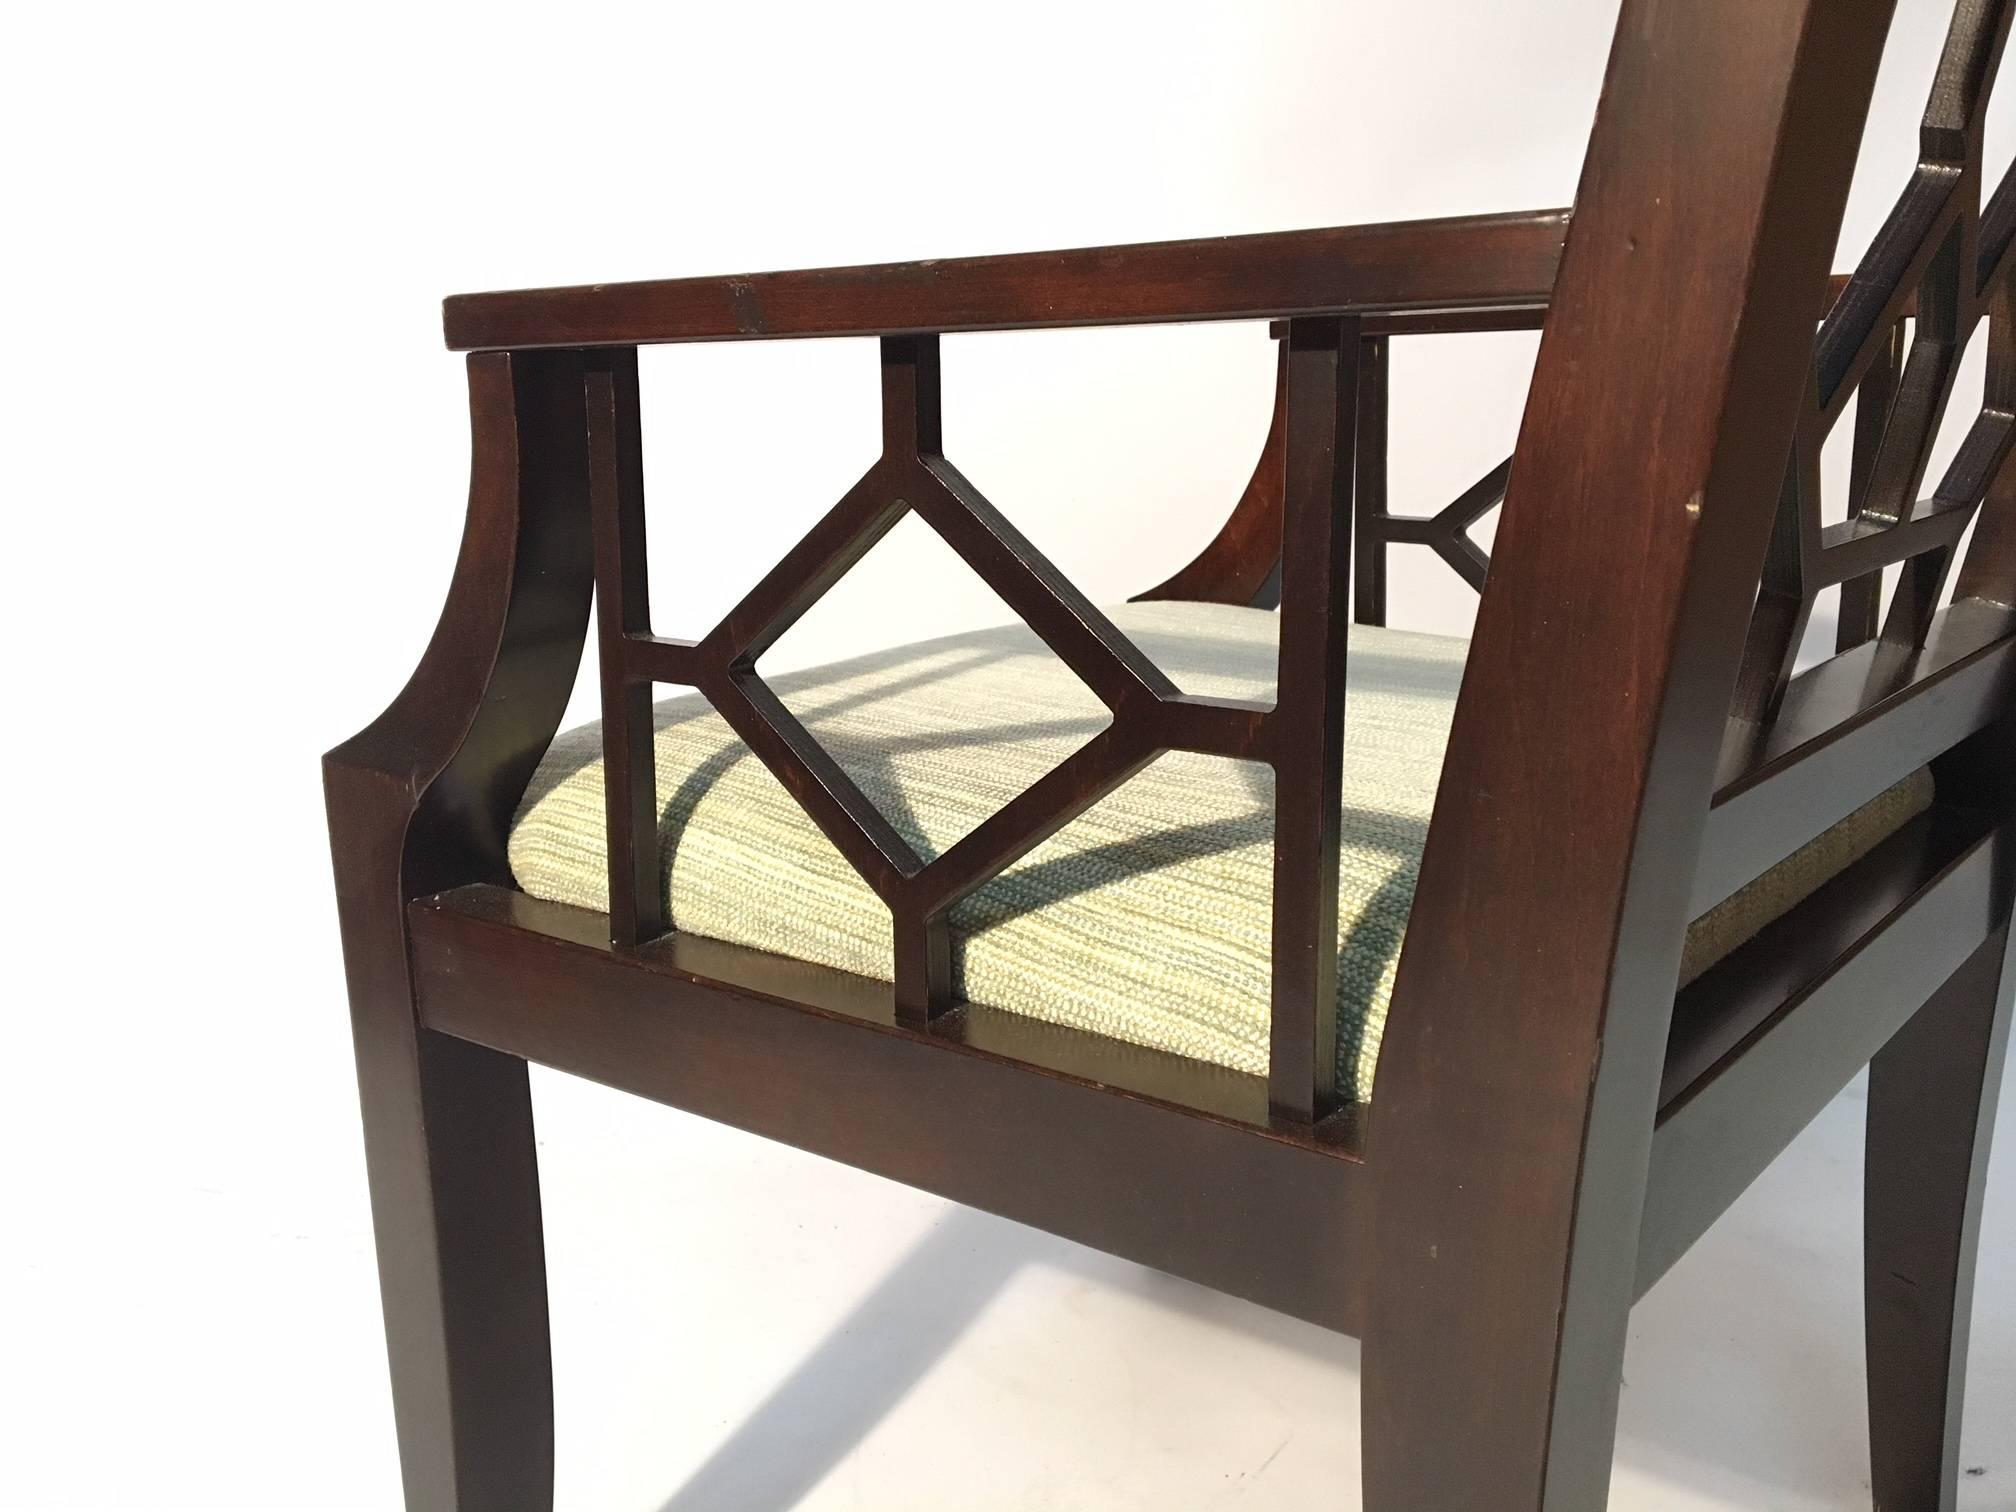 Contemporary Asian Chinoiserie Dining Chairs from the Breakers Hotel